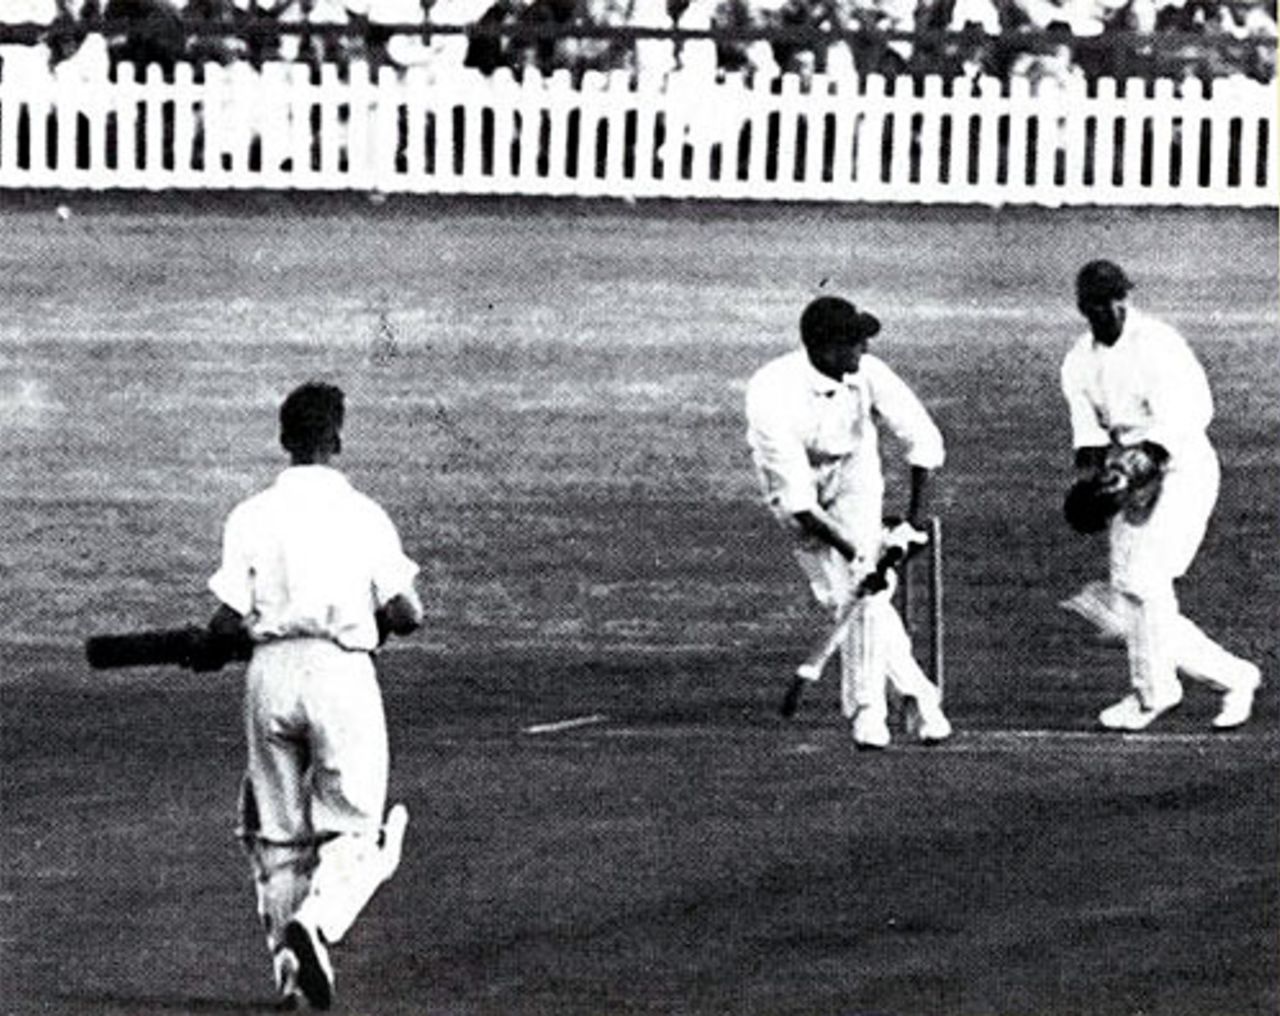 Pieter van der Bijl flicks the ball to long leg in the Timeless Test. He made a first-innings hundred and was dismissed for 97 in the second innings, South Africa v England, 5th Test, Durban, March 8, 1939